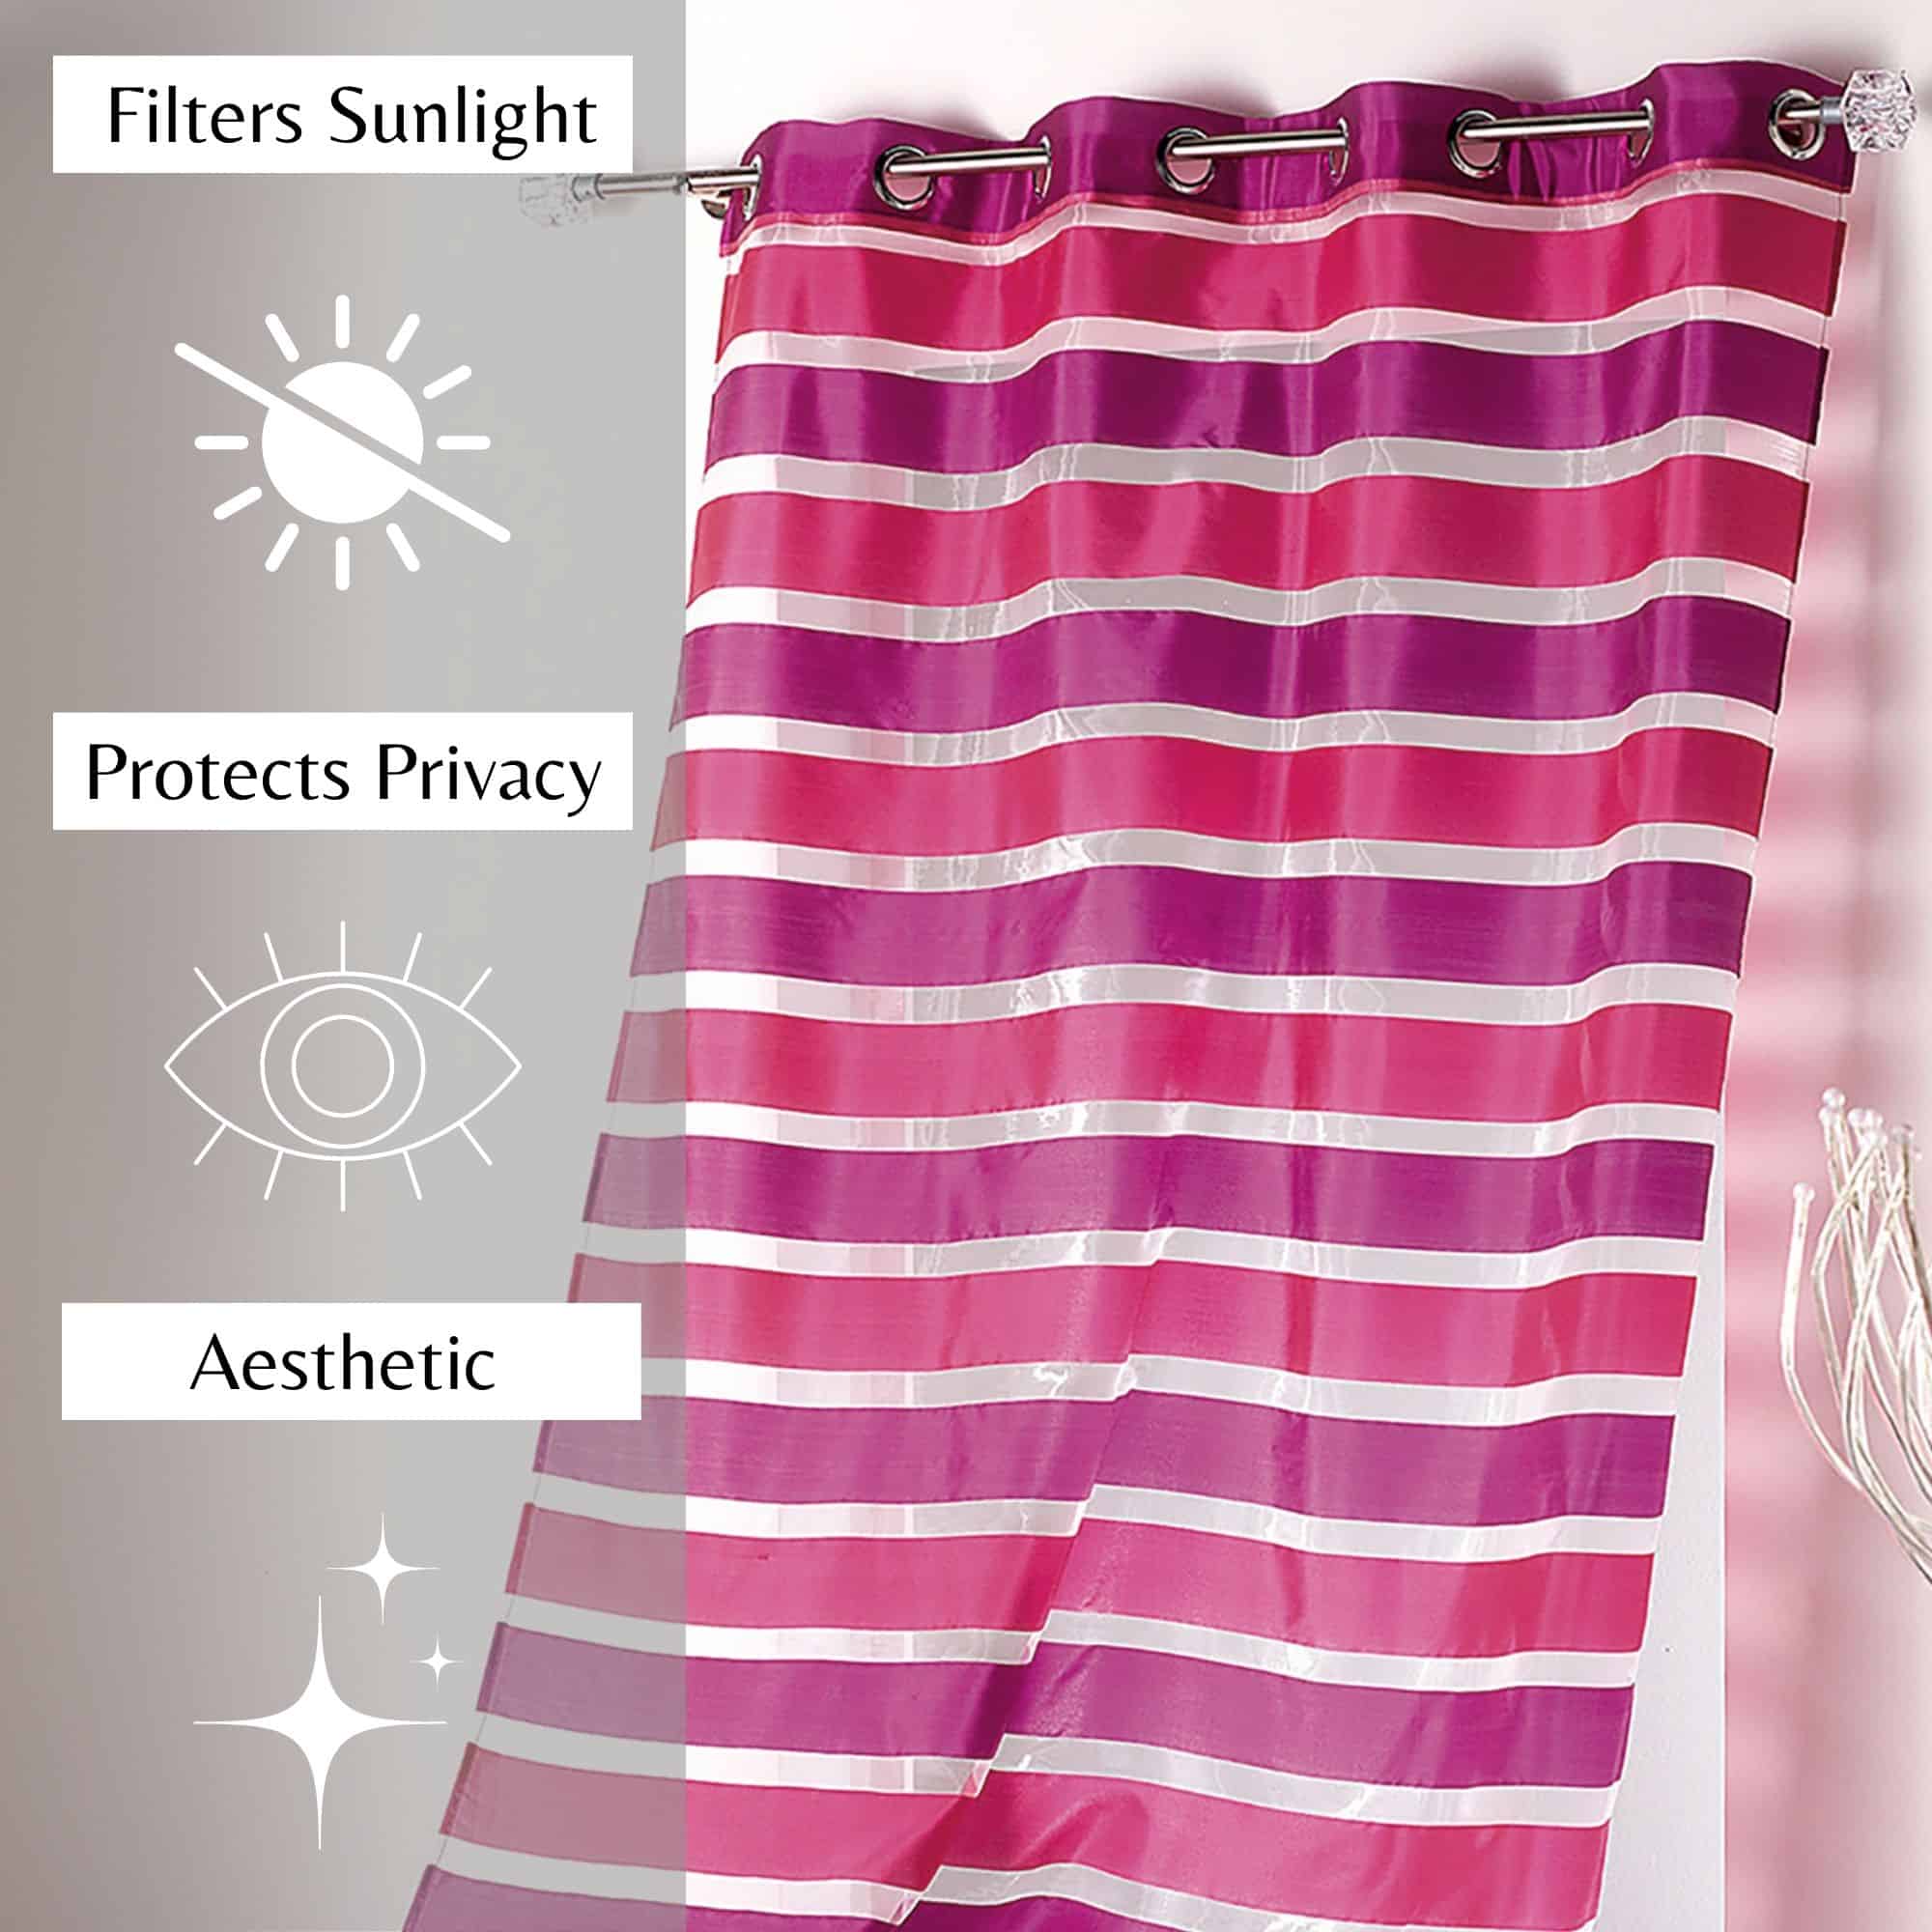 filters sunlight protects privacy aesthetic sheer voile for home decor